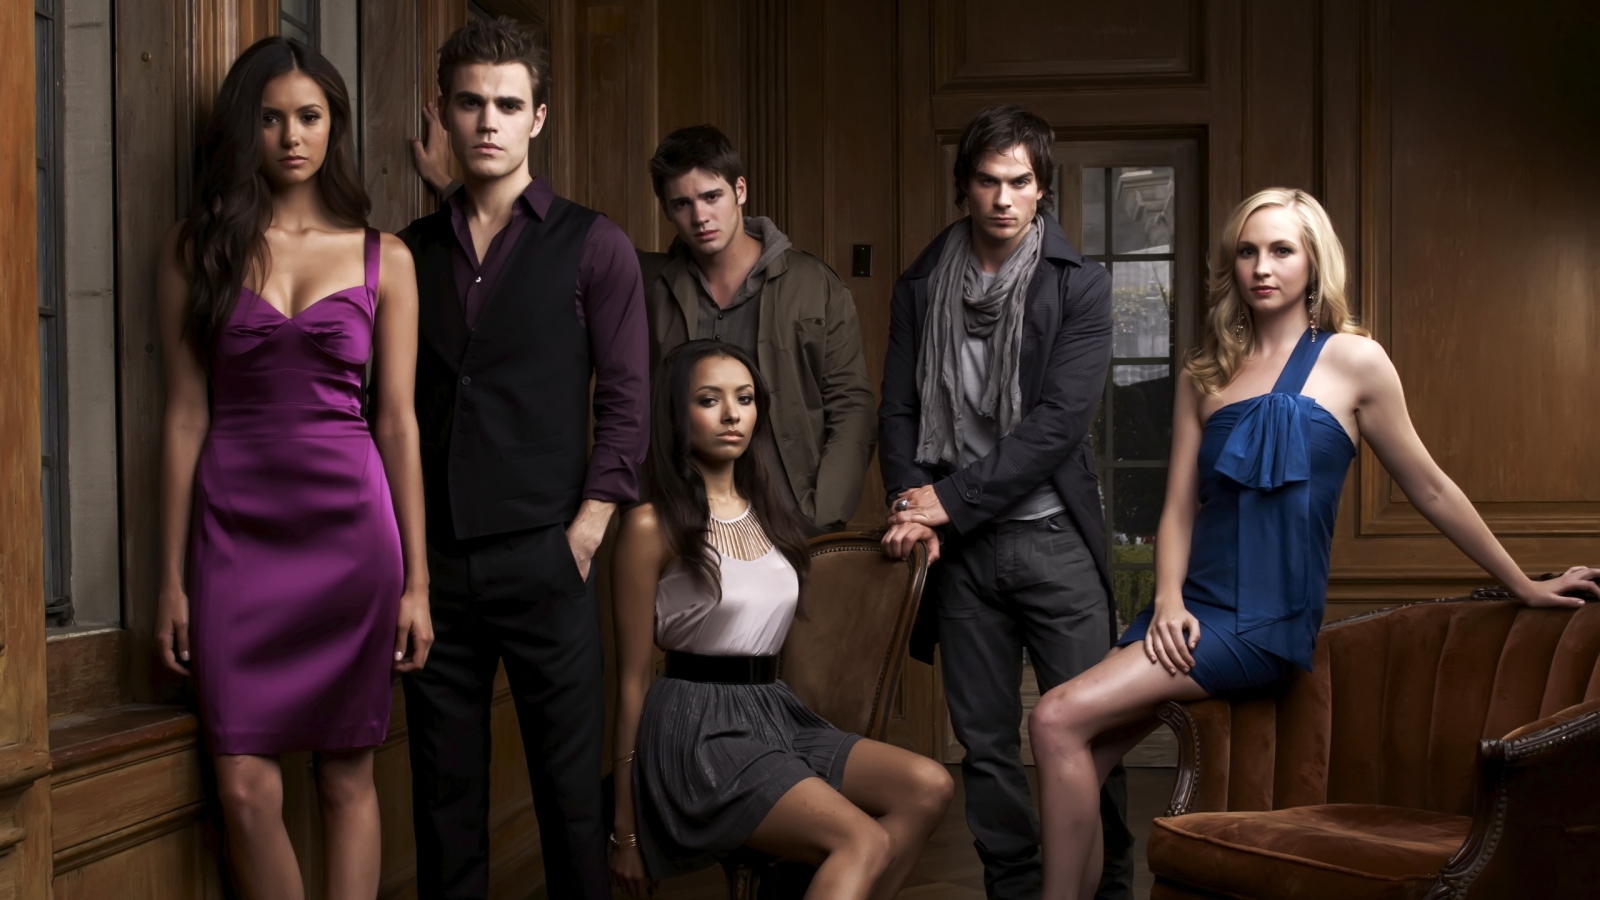 The Vampire Diaries Cast for 1600 x 900 HDTV resolution